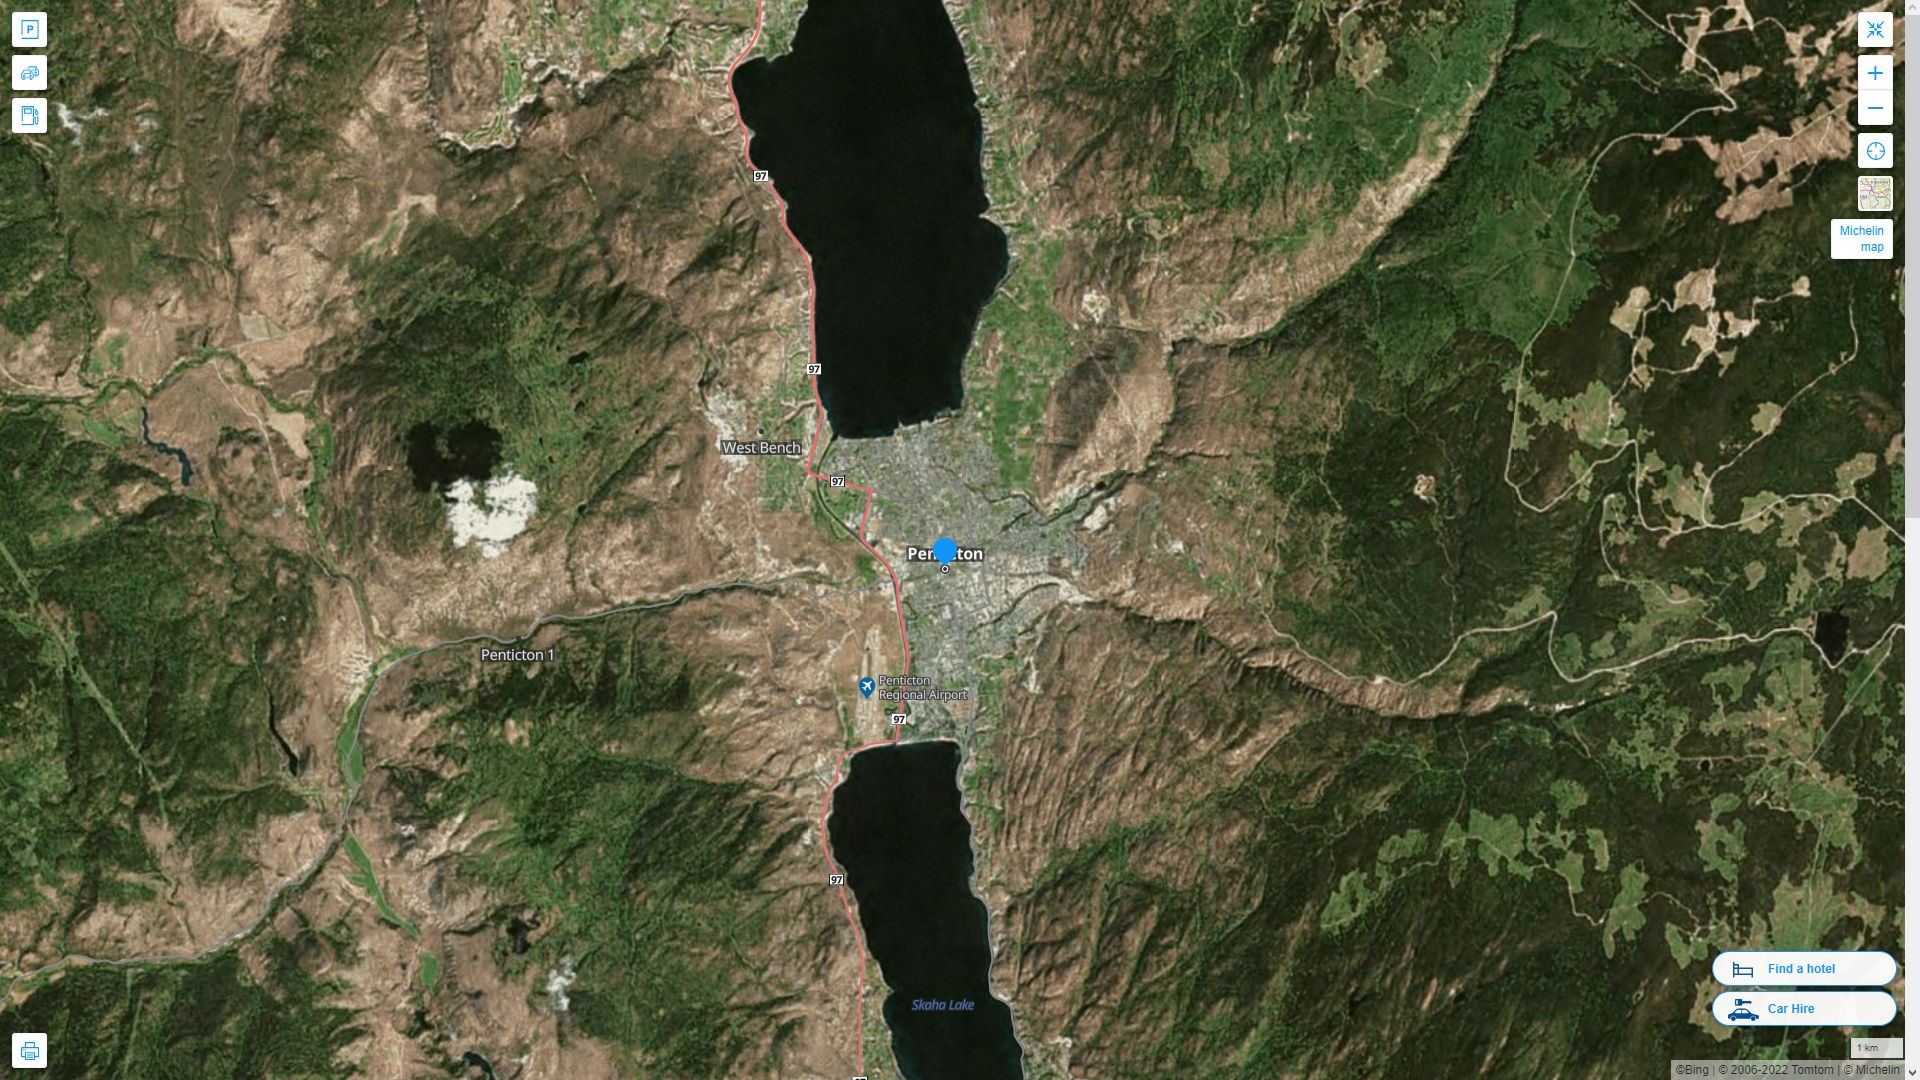 Penticton Highway and Road Map with Satellite View